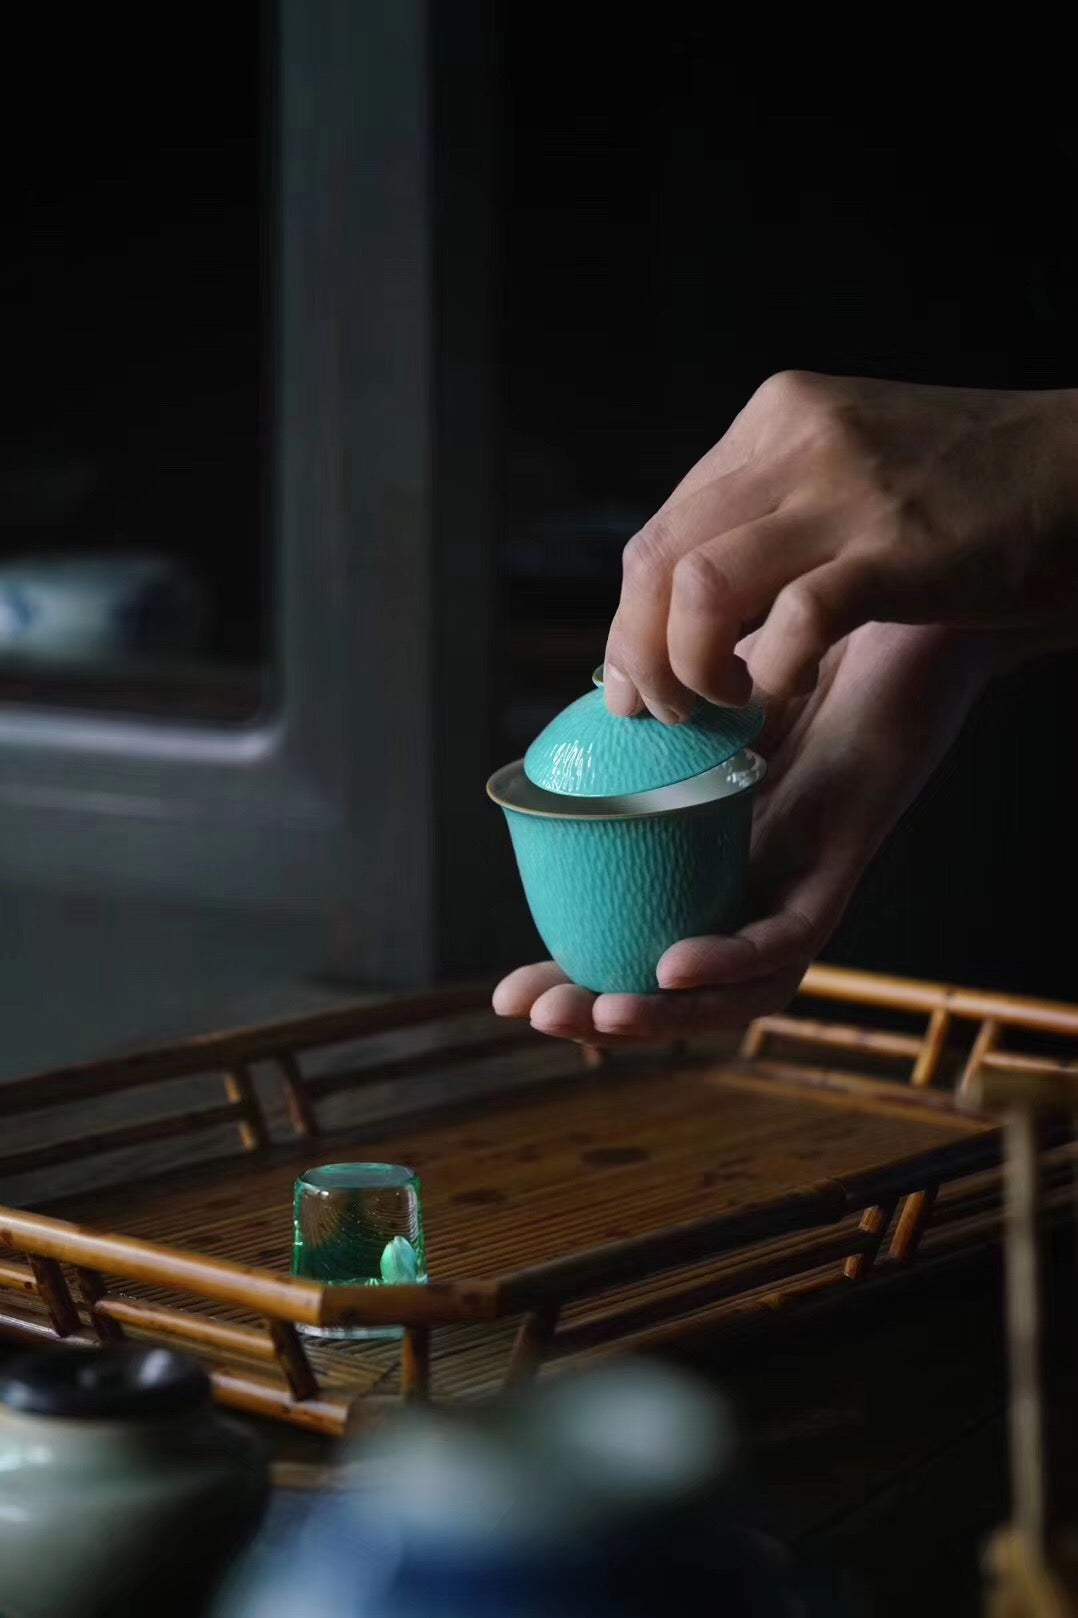 Hand Sculptural And Turquoise Chinese Tea Style Gaiwan|Best Ceramics